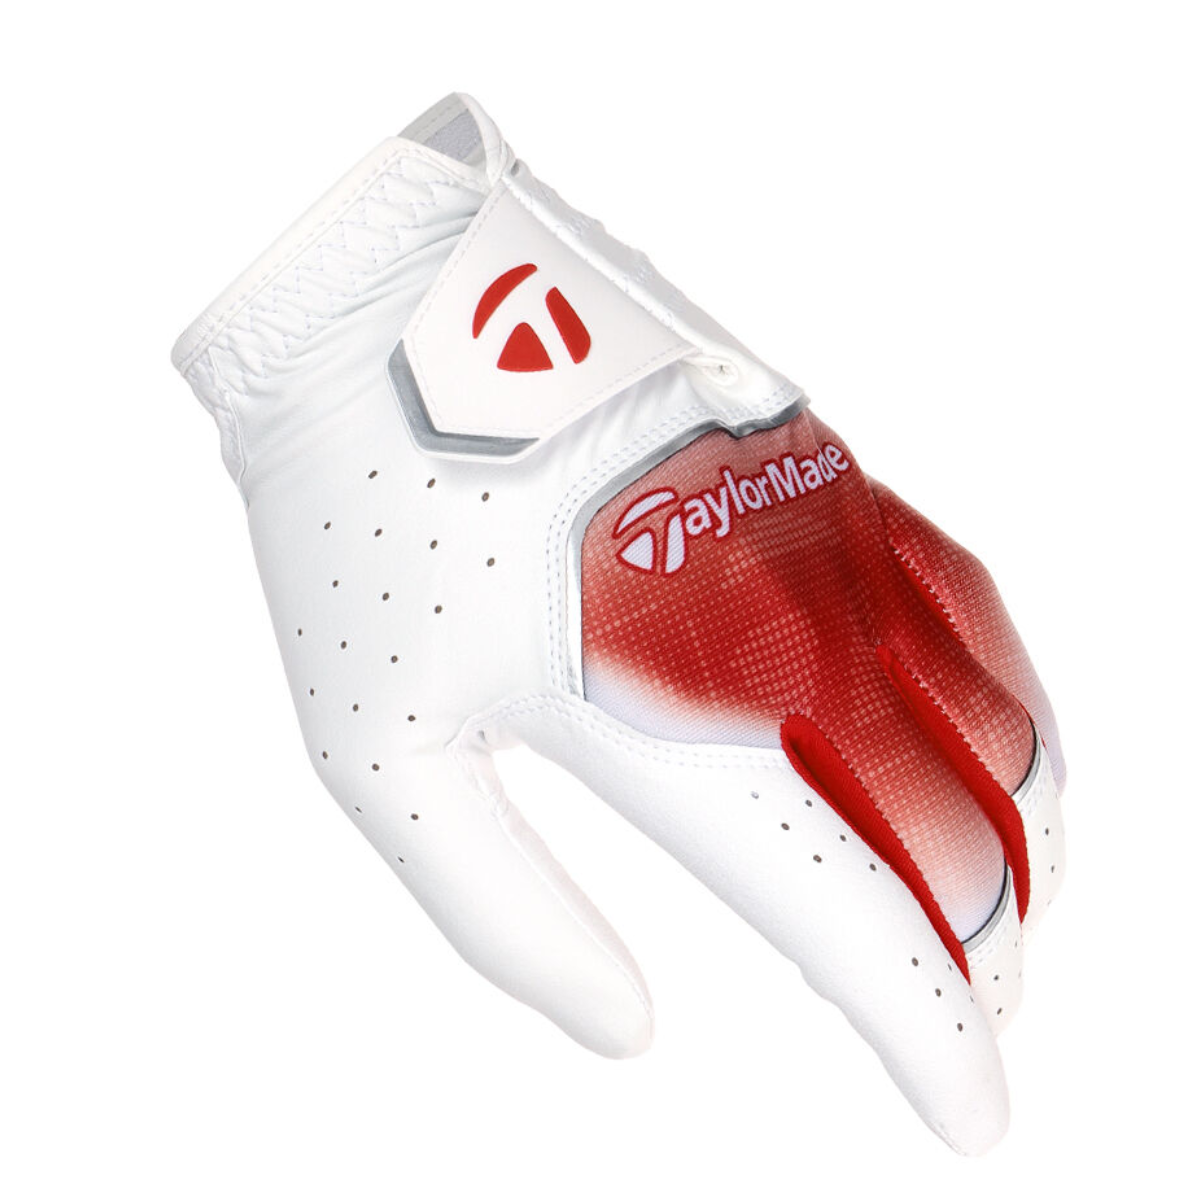 TaylorMade Graphic Sport Glove